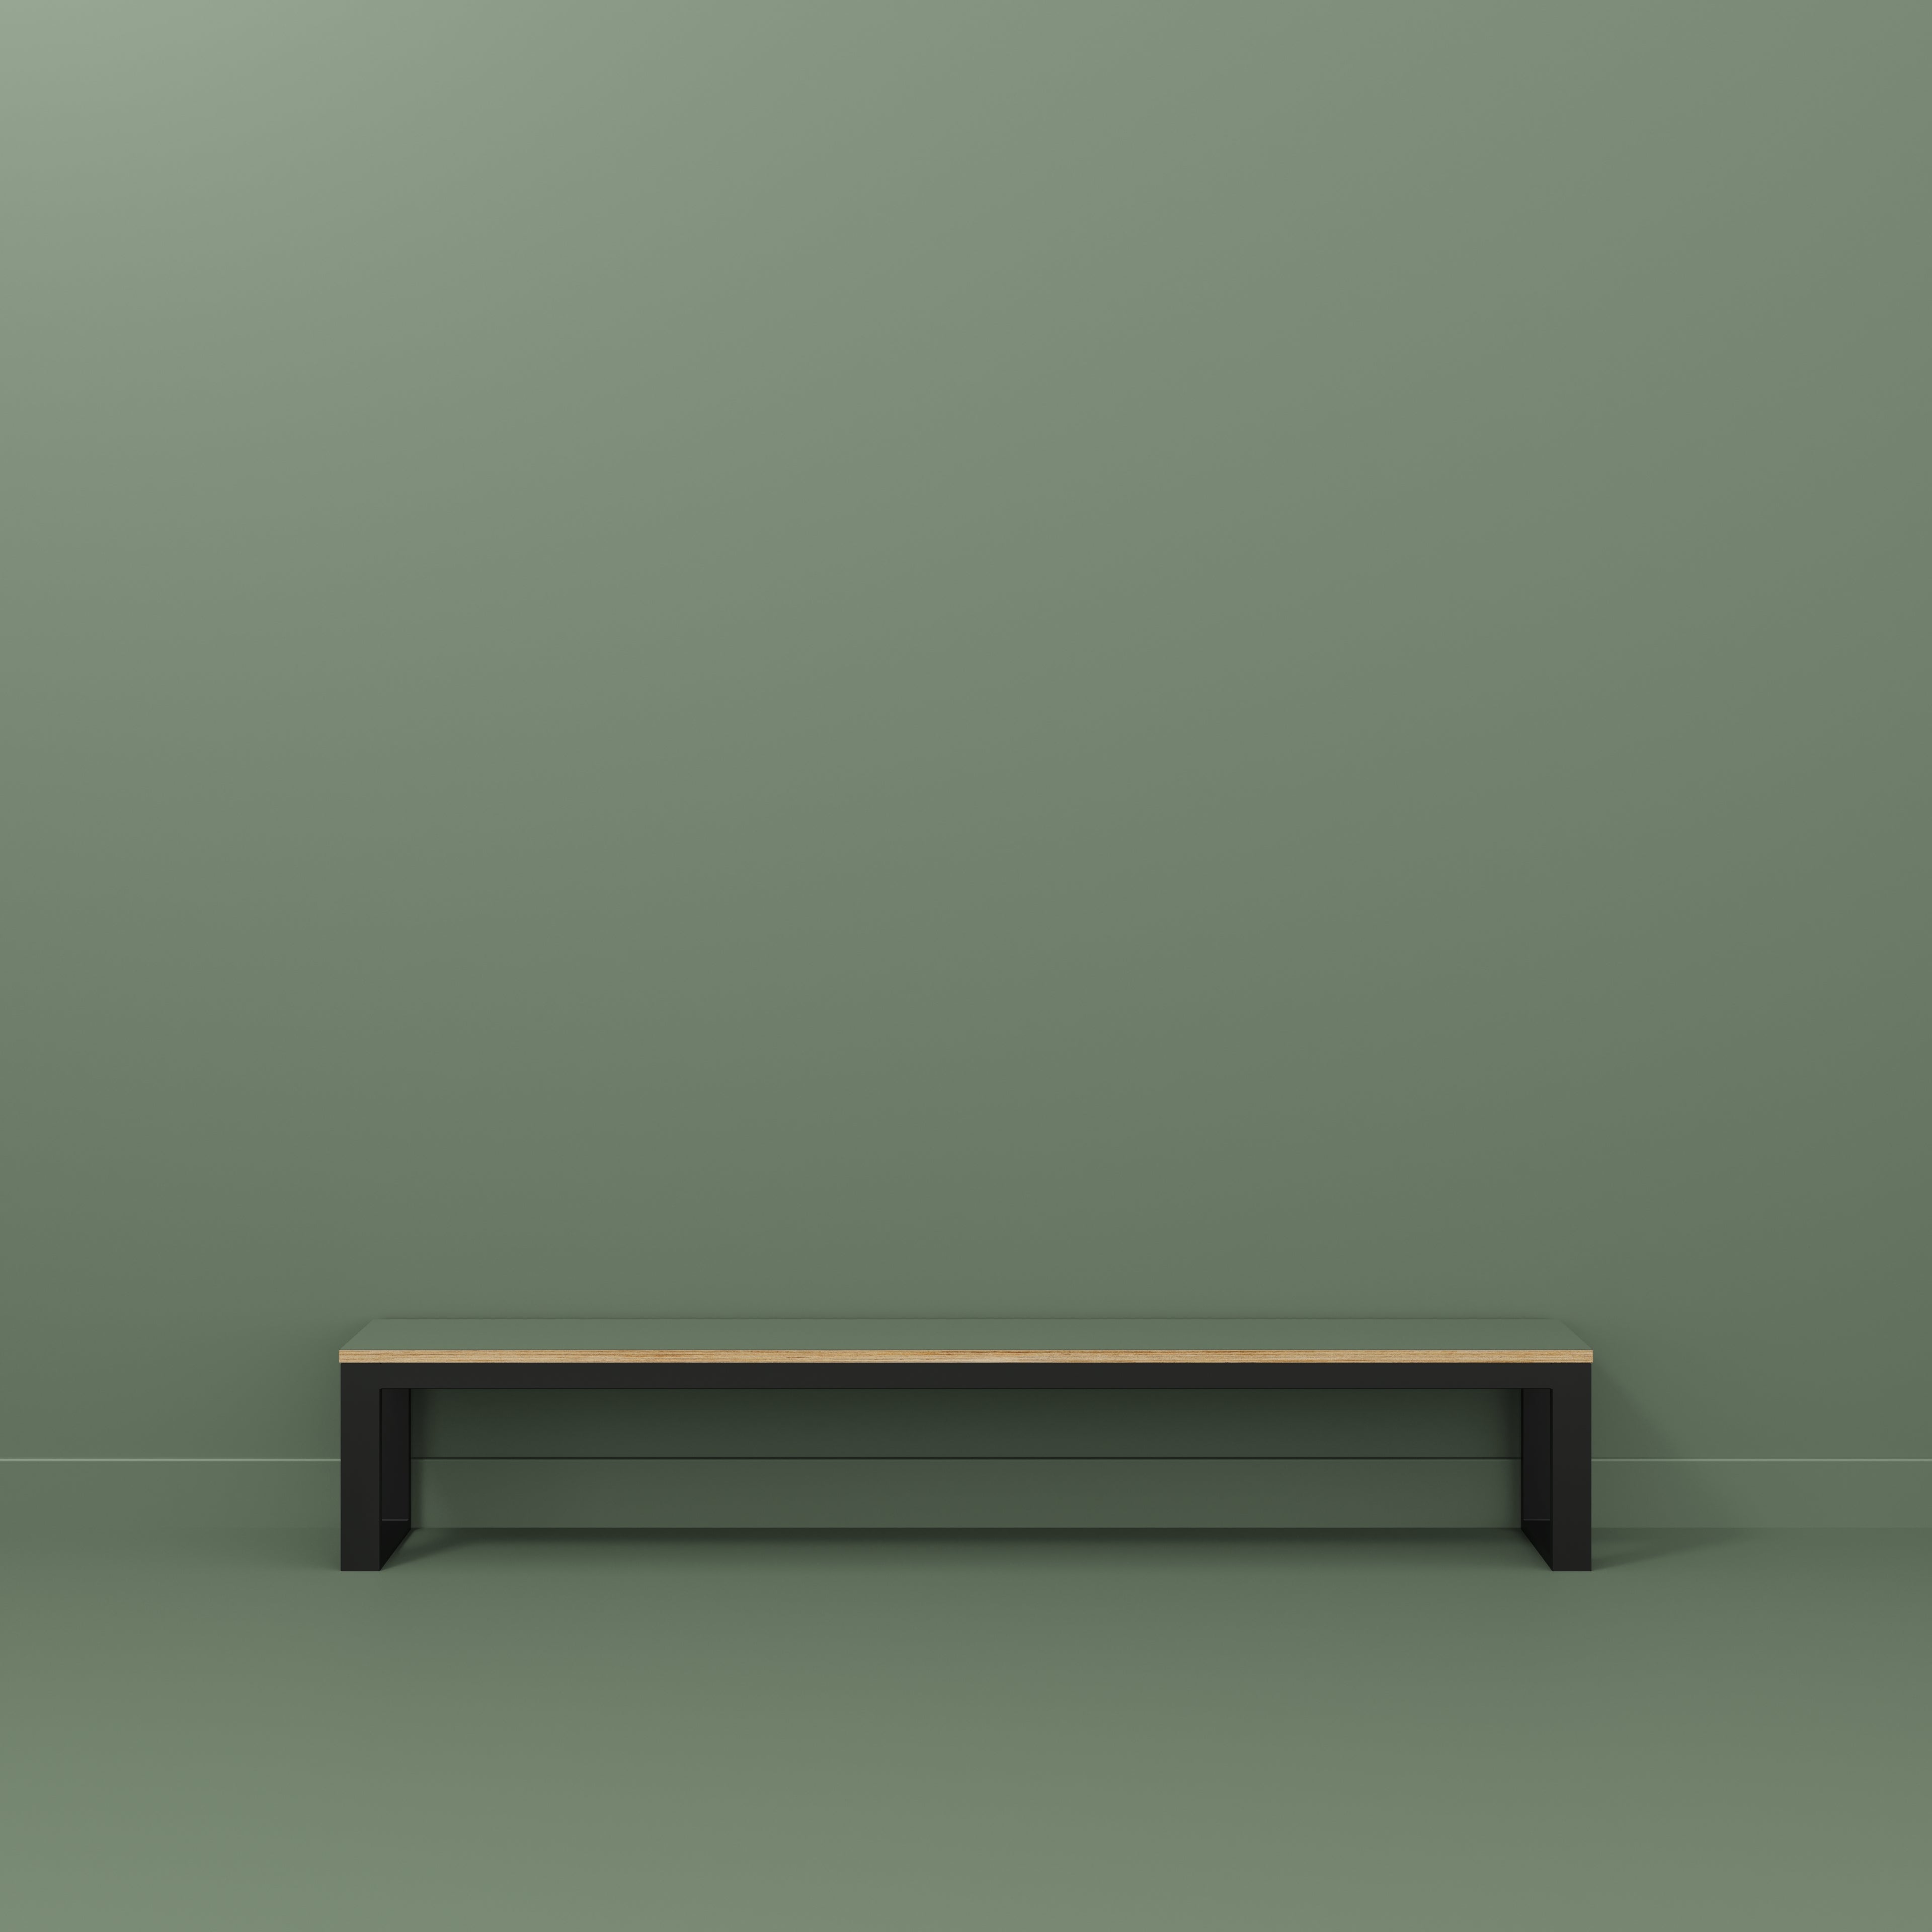 Bench Seat with Black Industrial Frame - Formica Green Slate - 2400(w) x 325(d)